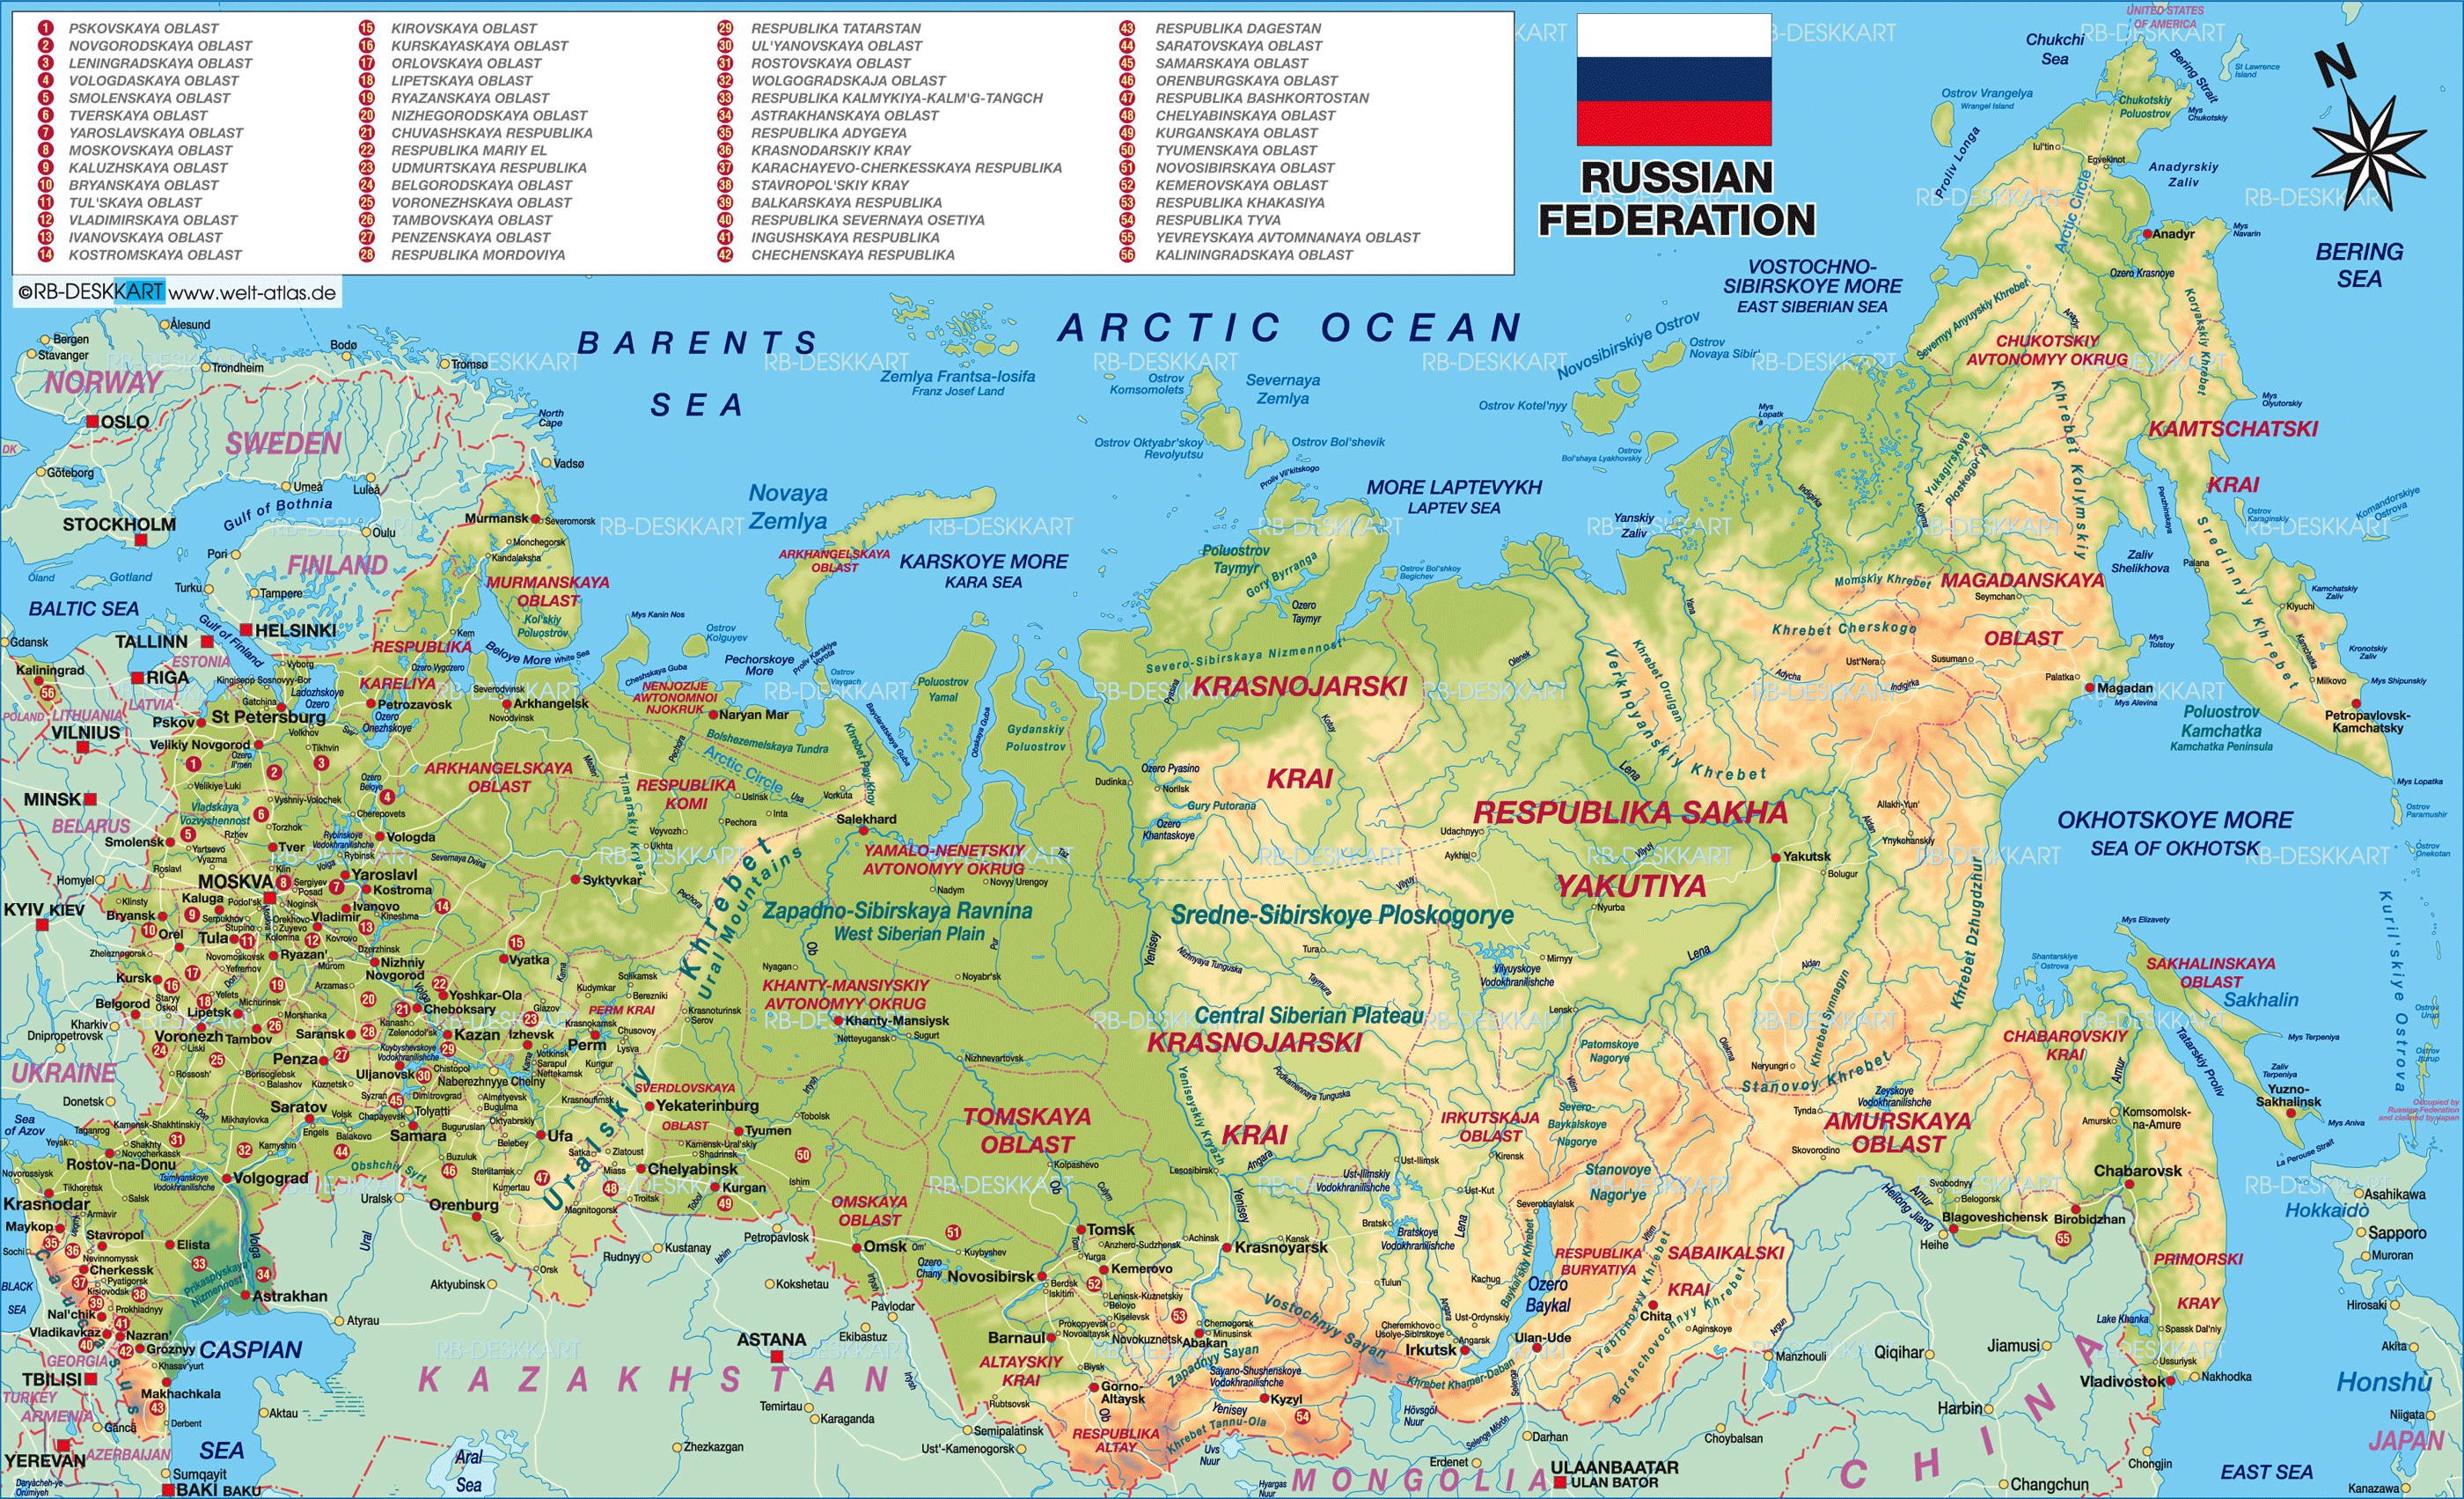 Map of Russia (General Map / Region of the World)